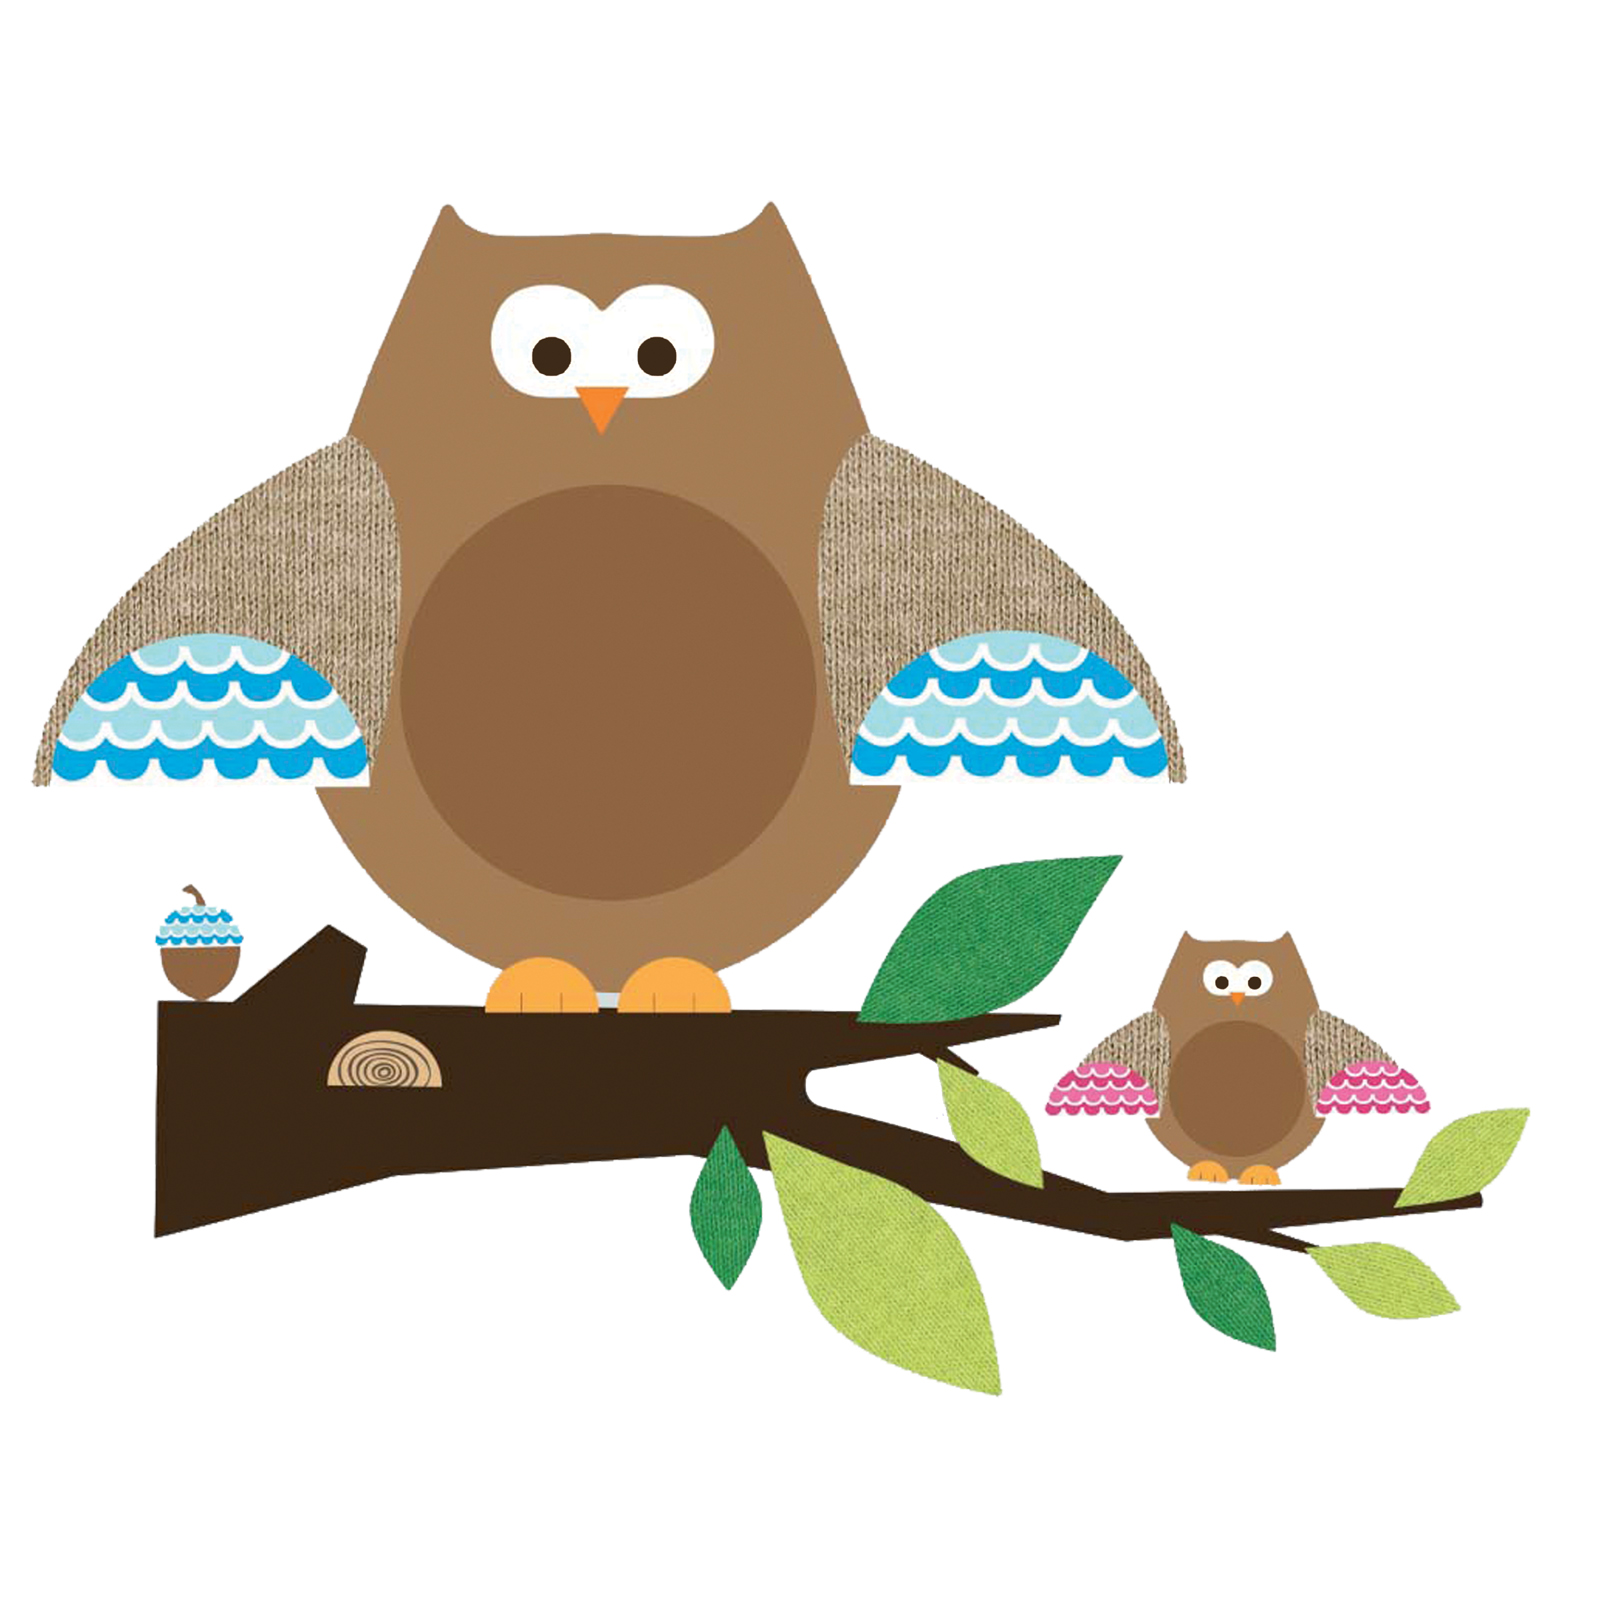 ONE decor Owls and Branches Giant Wall Decals